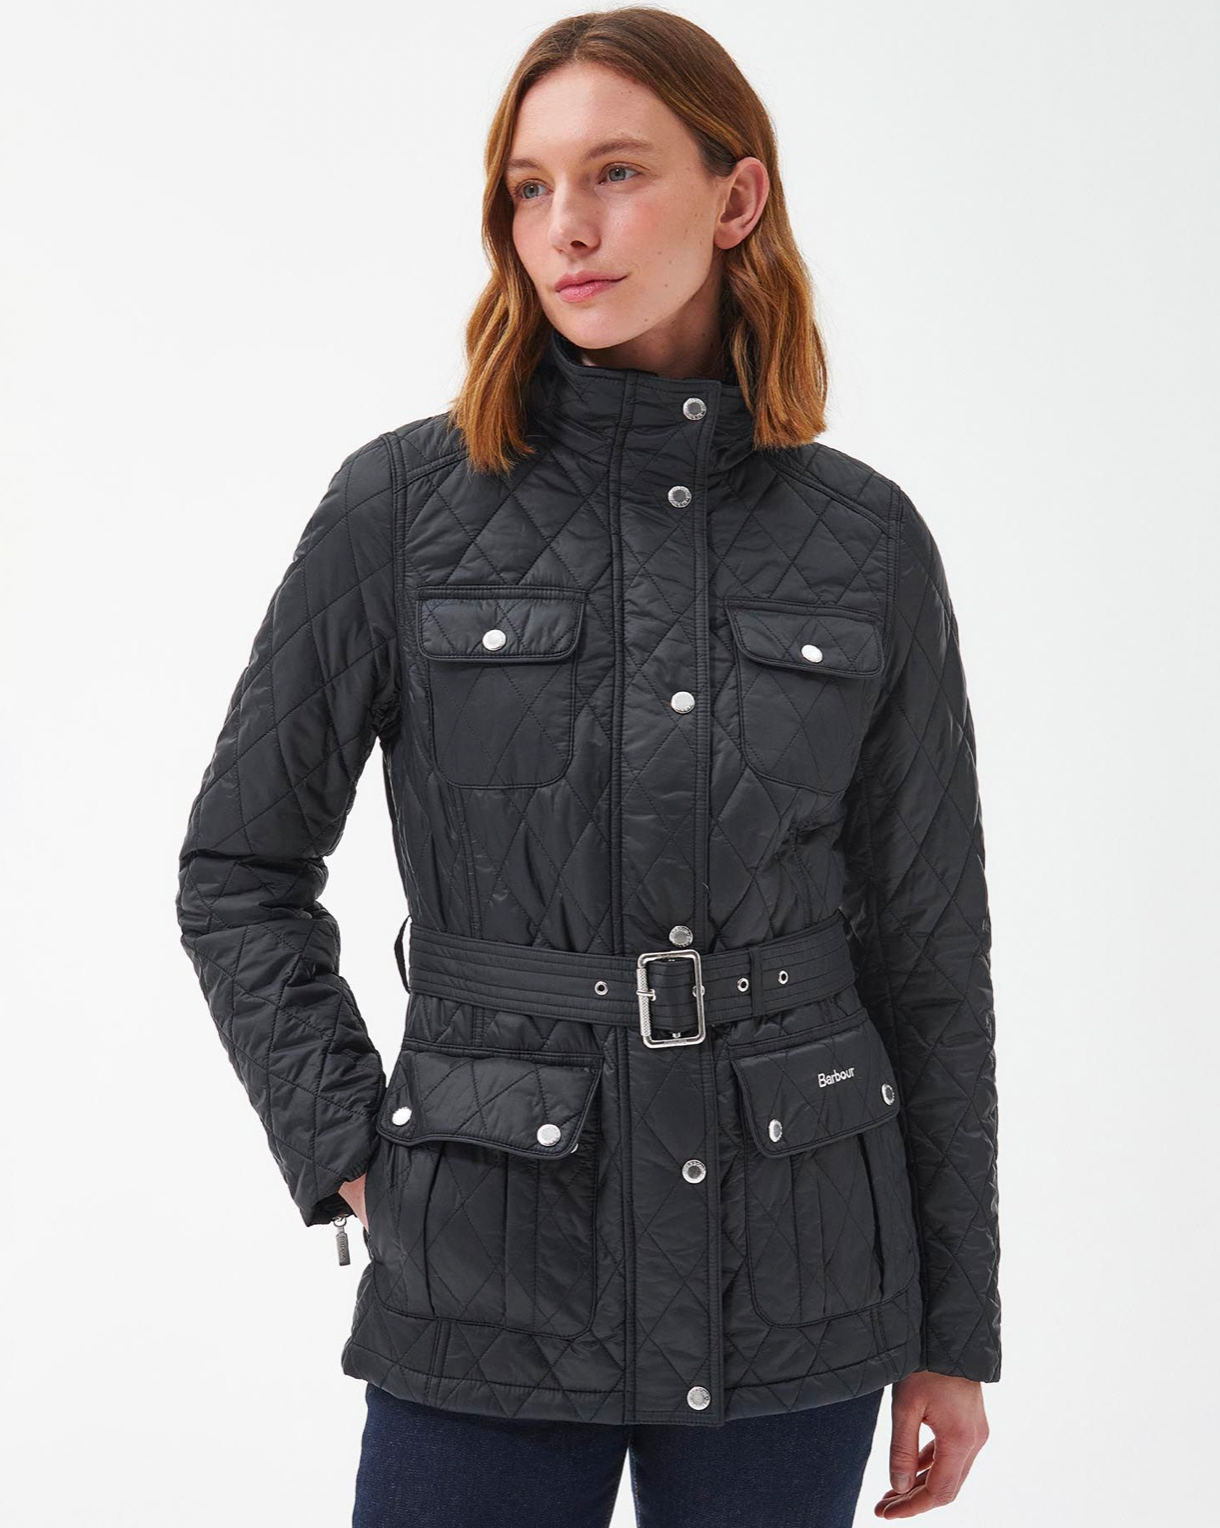 Model Wearing Barbour Belted Country Utility Quilt Black/Rose Garden Floral Coat Wearing Jeans On A White Background